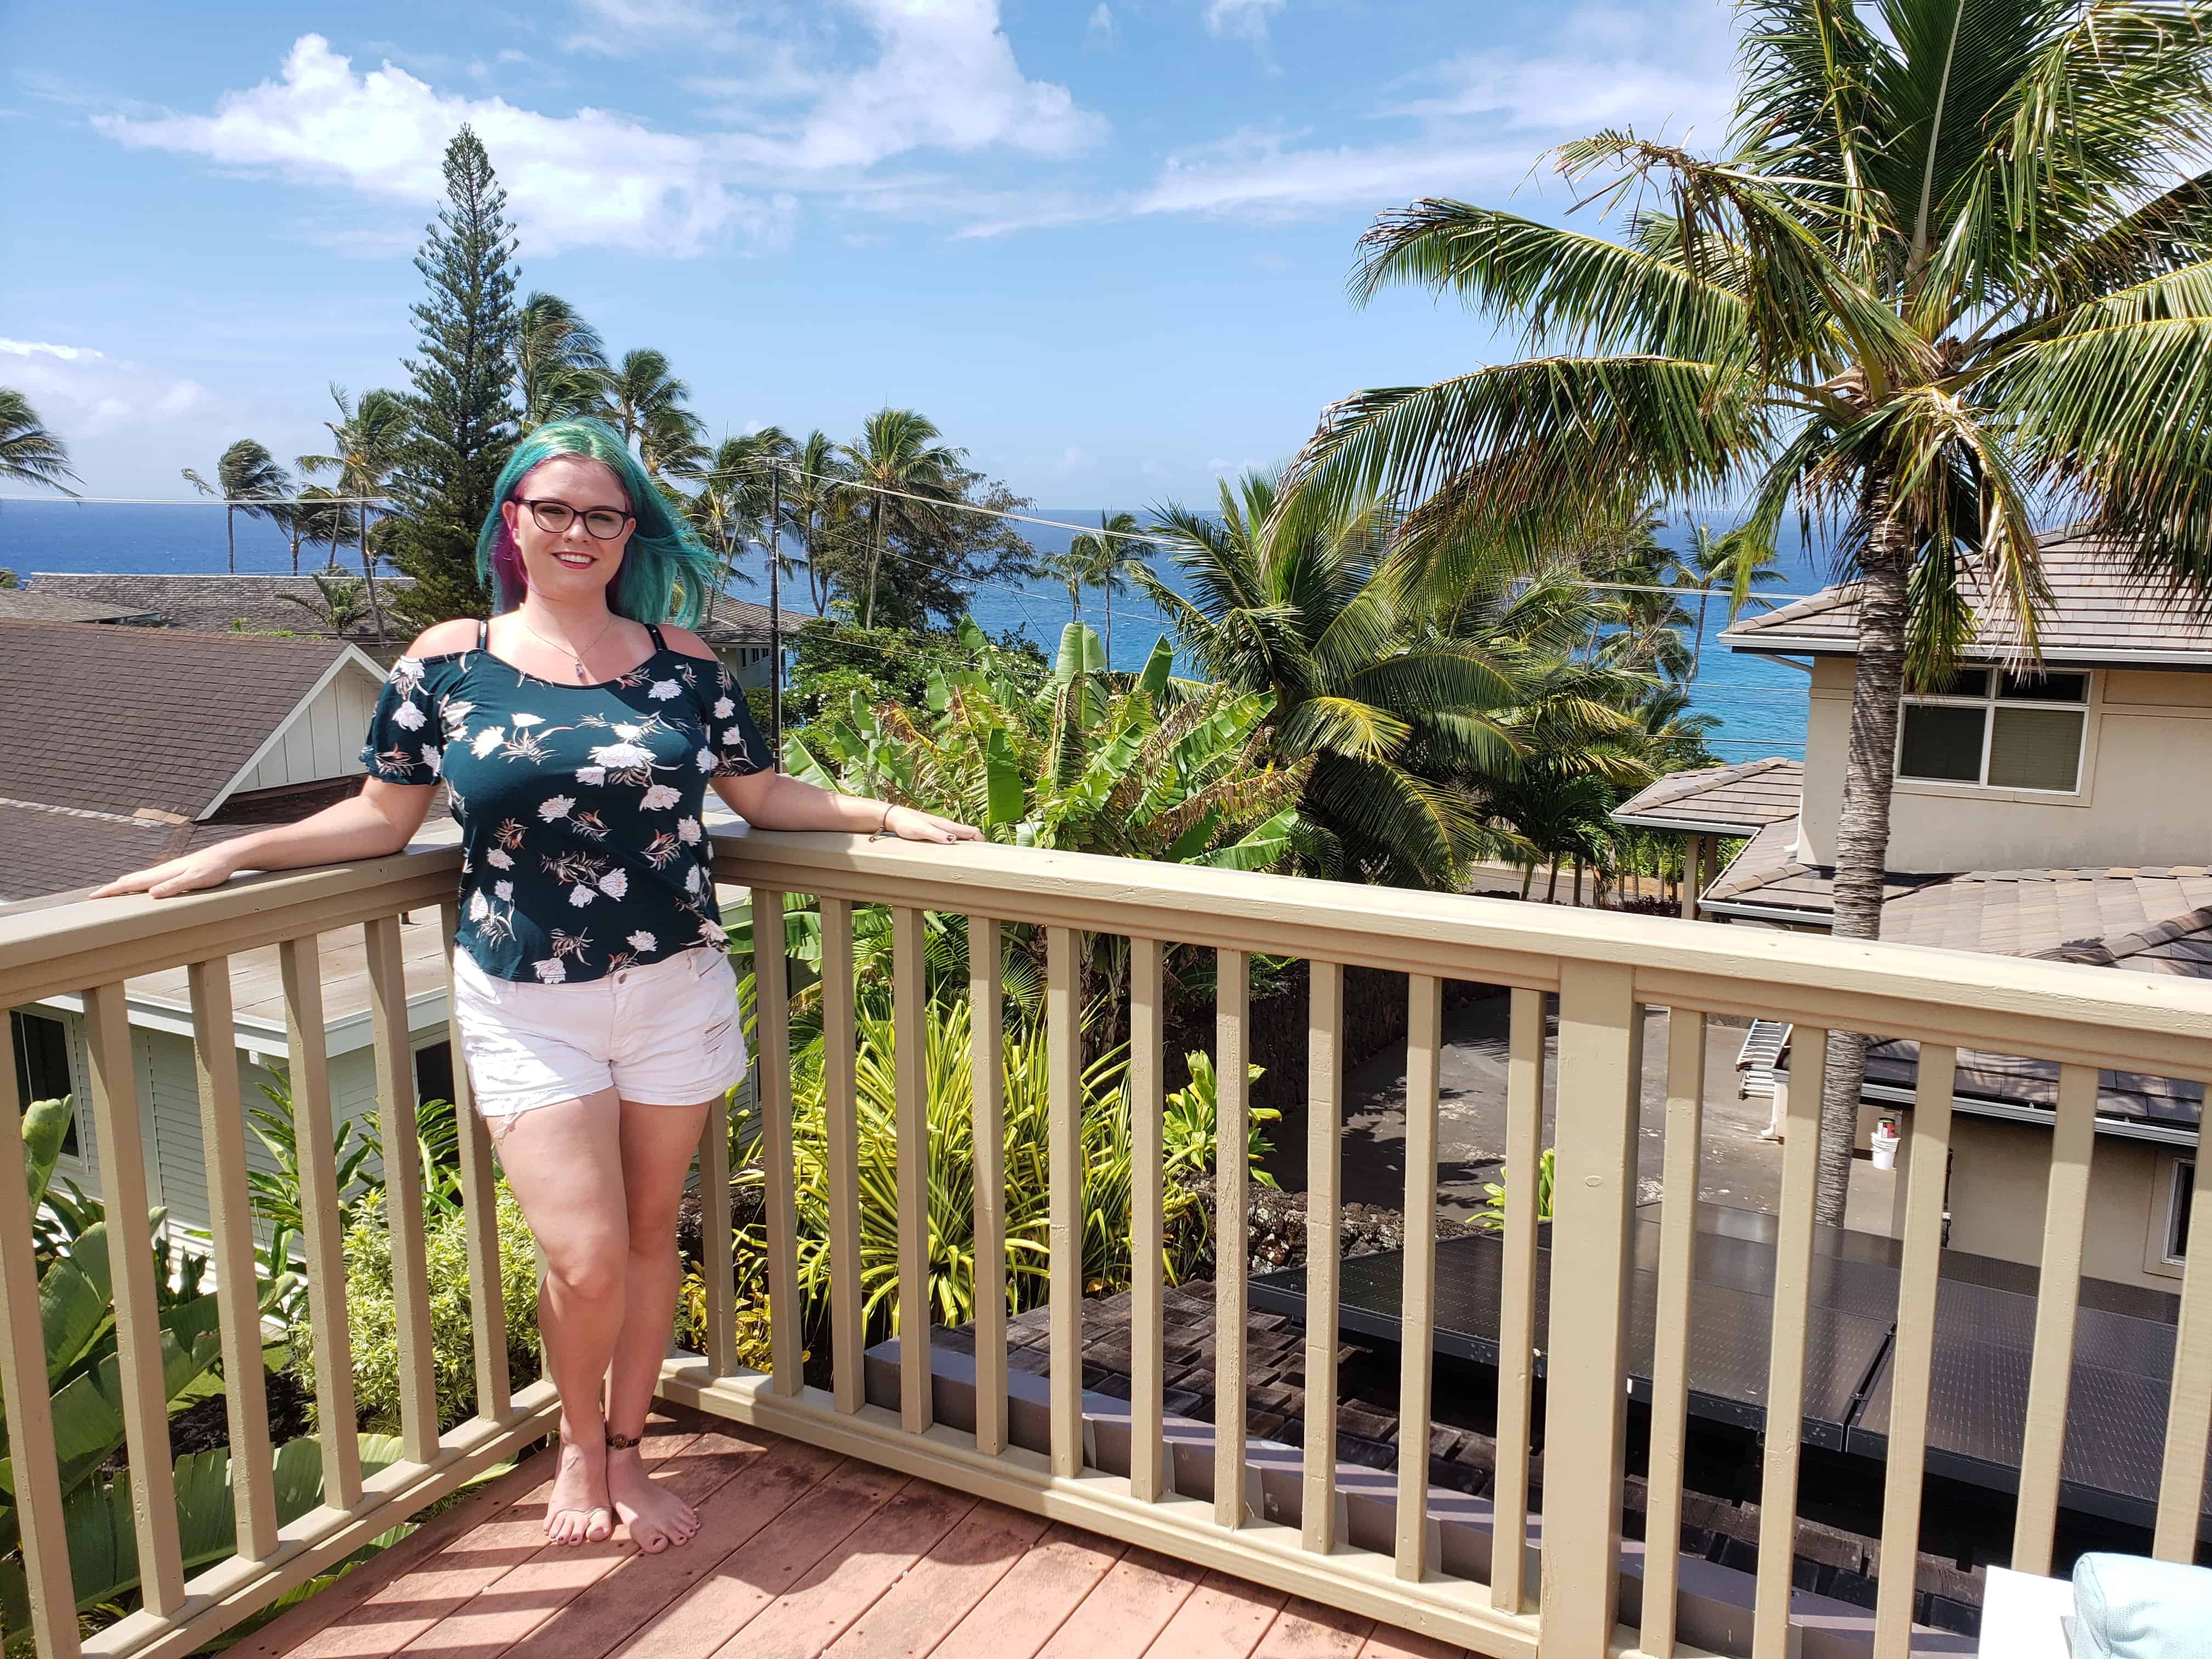 A woman with green and purple hair wearing a green floral shirt and white shorts stands against a balcony. The view behind her is residential with palm trees and the ocean in the distance behind her.